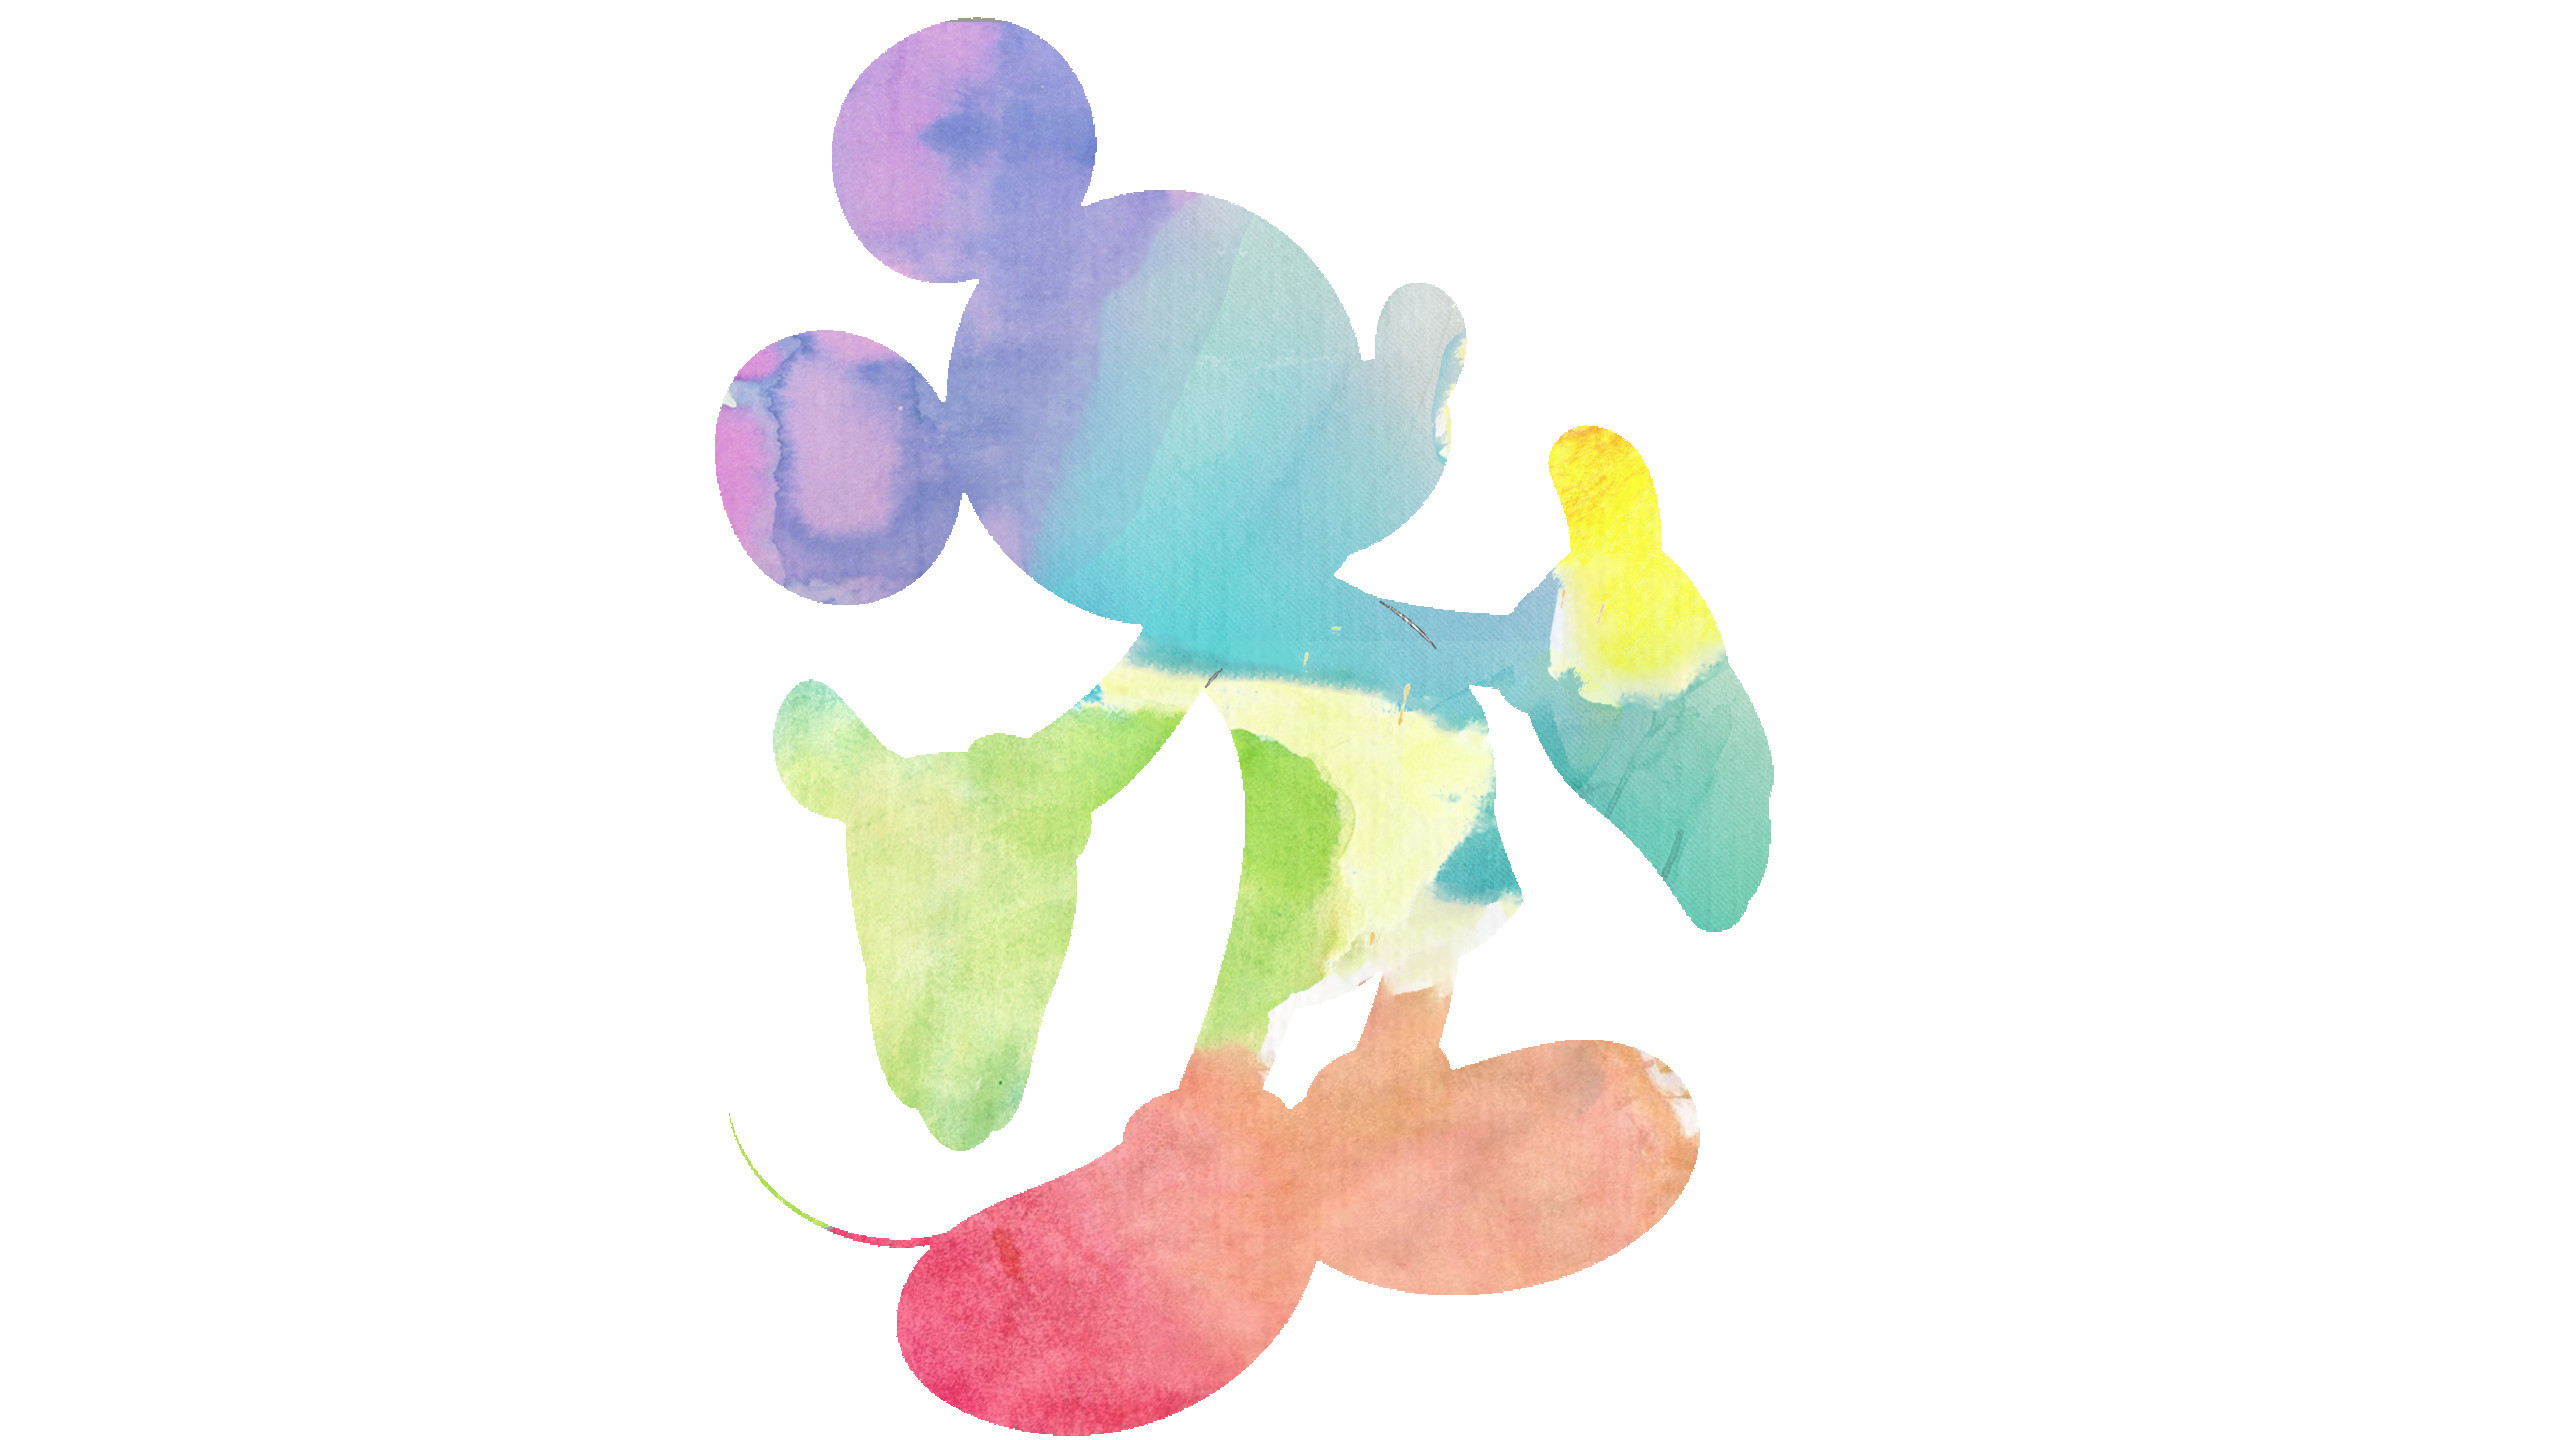 2560x1440 I created a New Mickey Mouse watercolour Wallpaper!